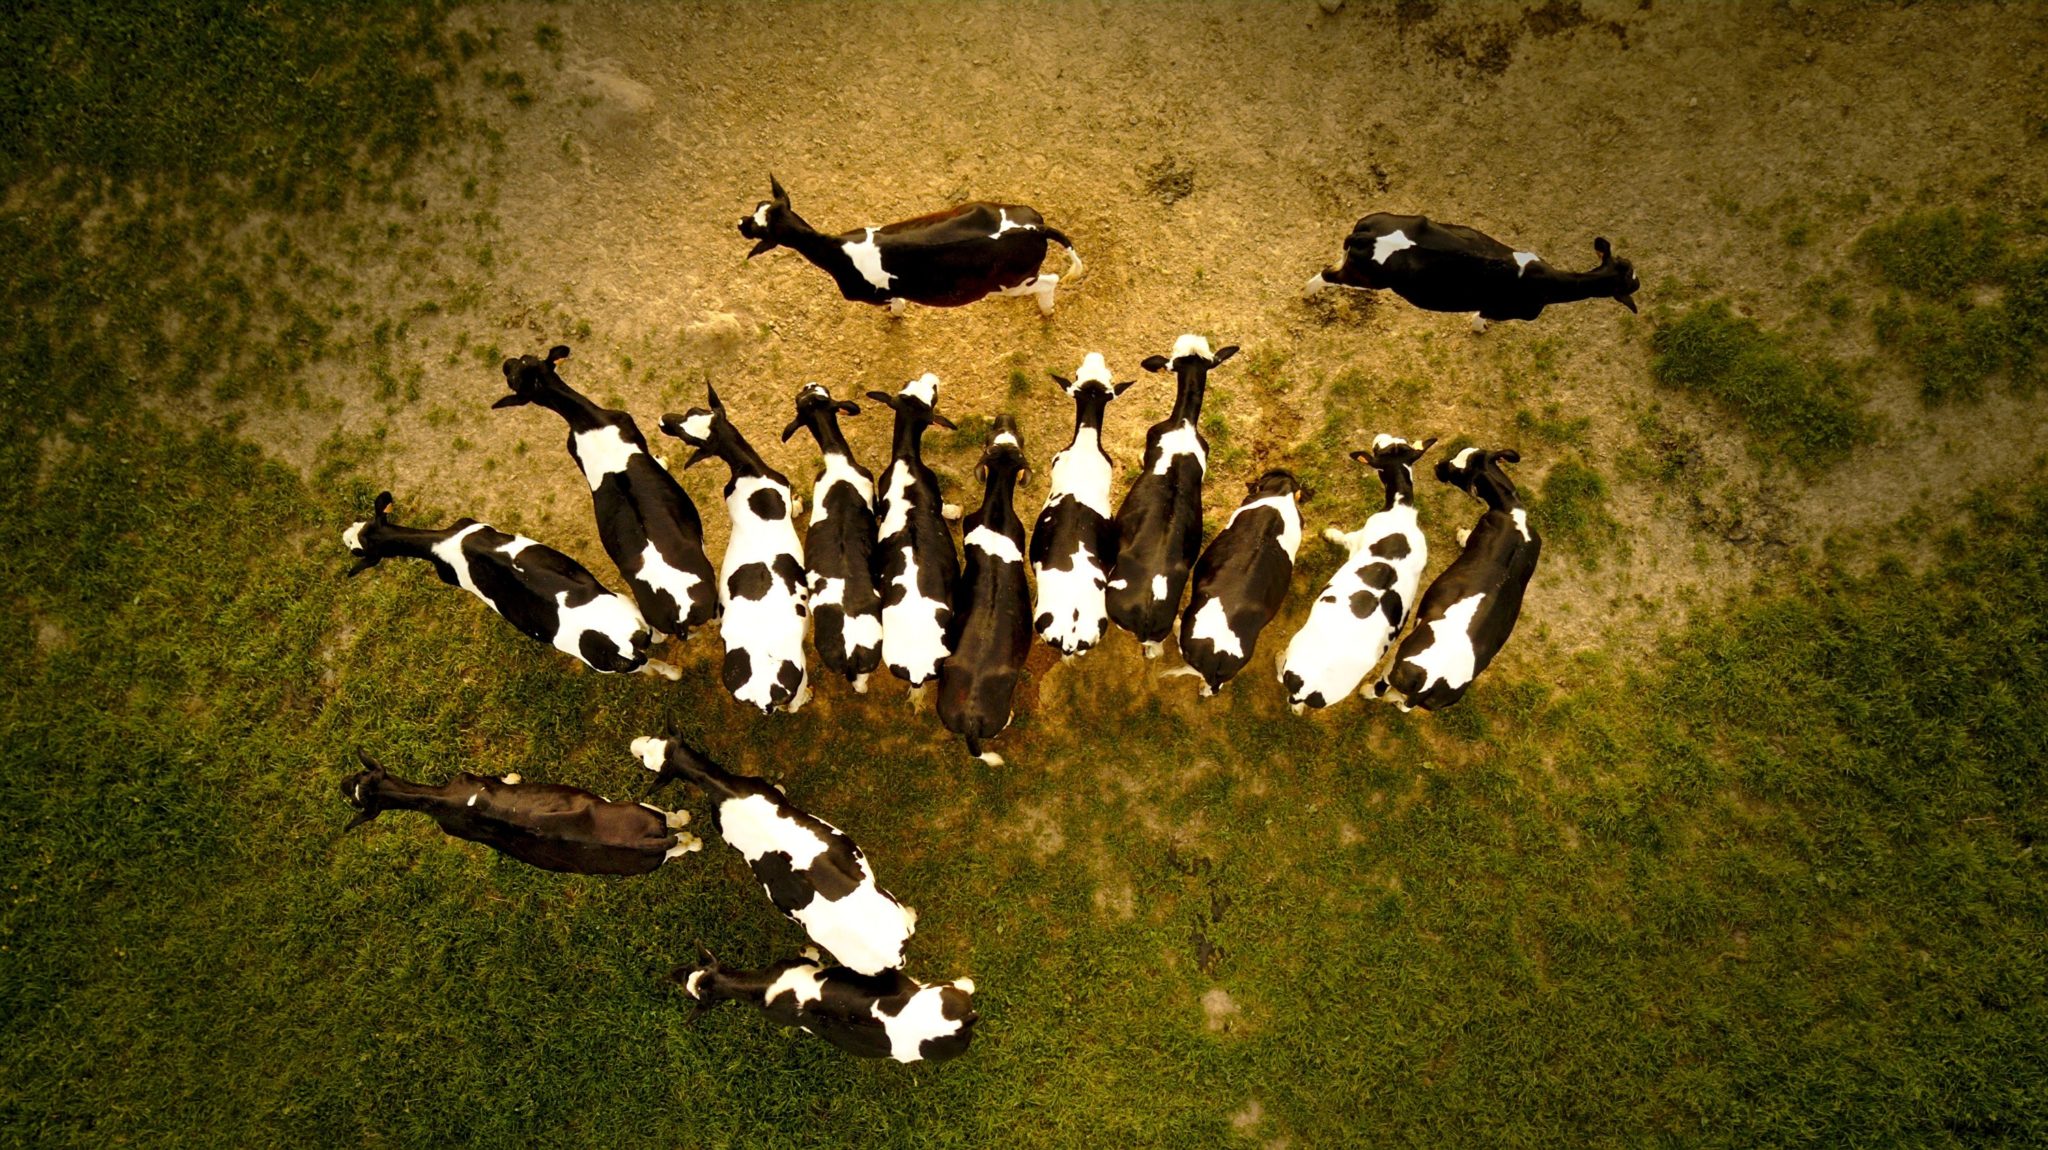 Aerial photo of a herd of cows on grass